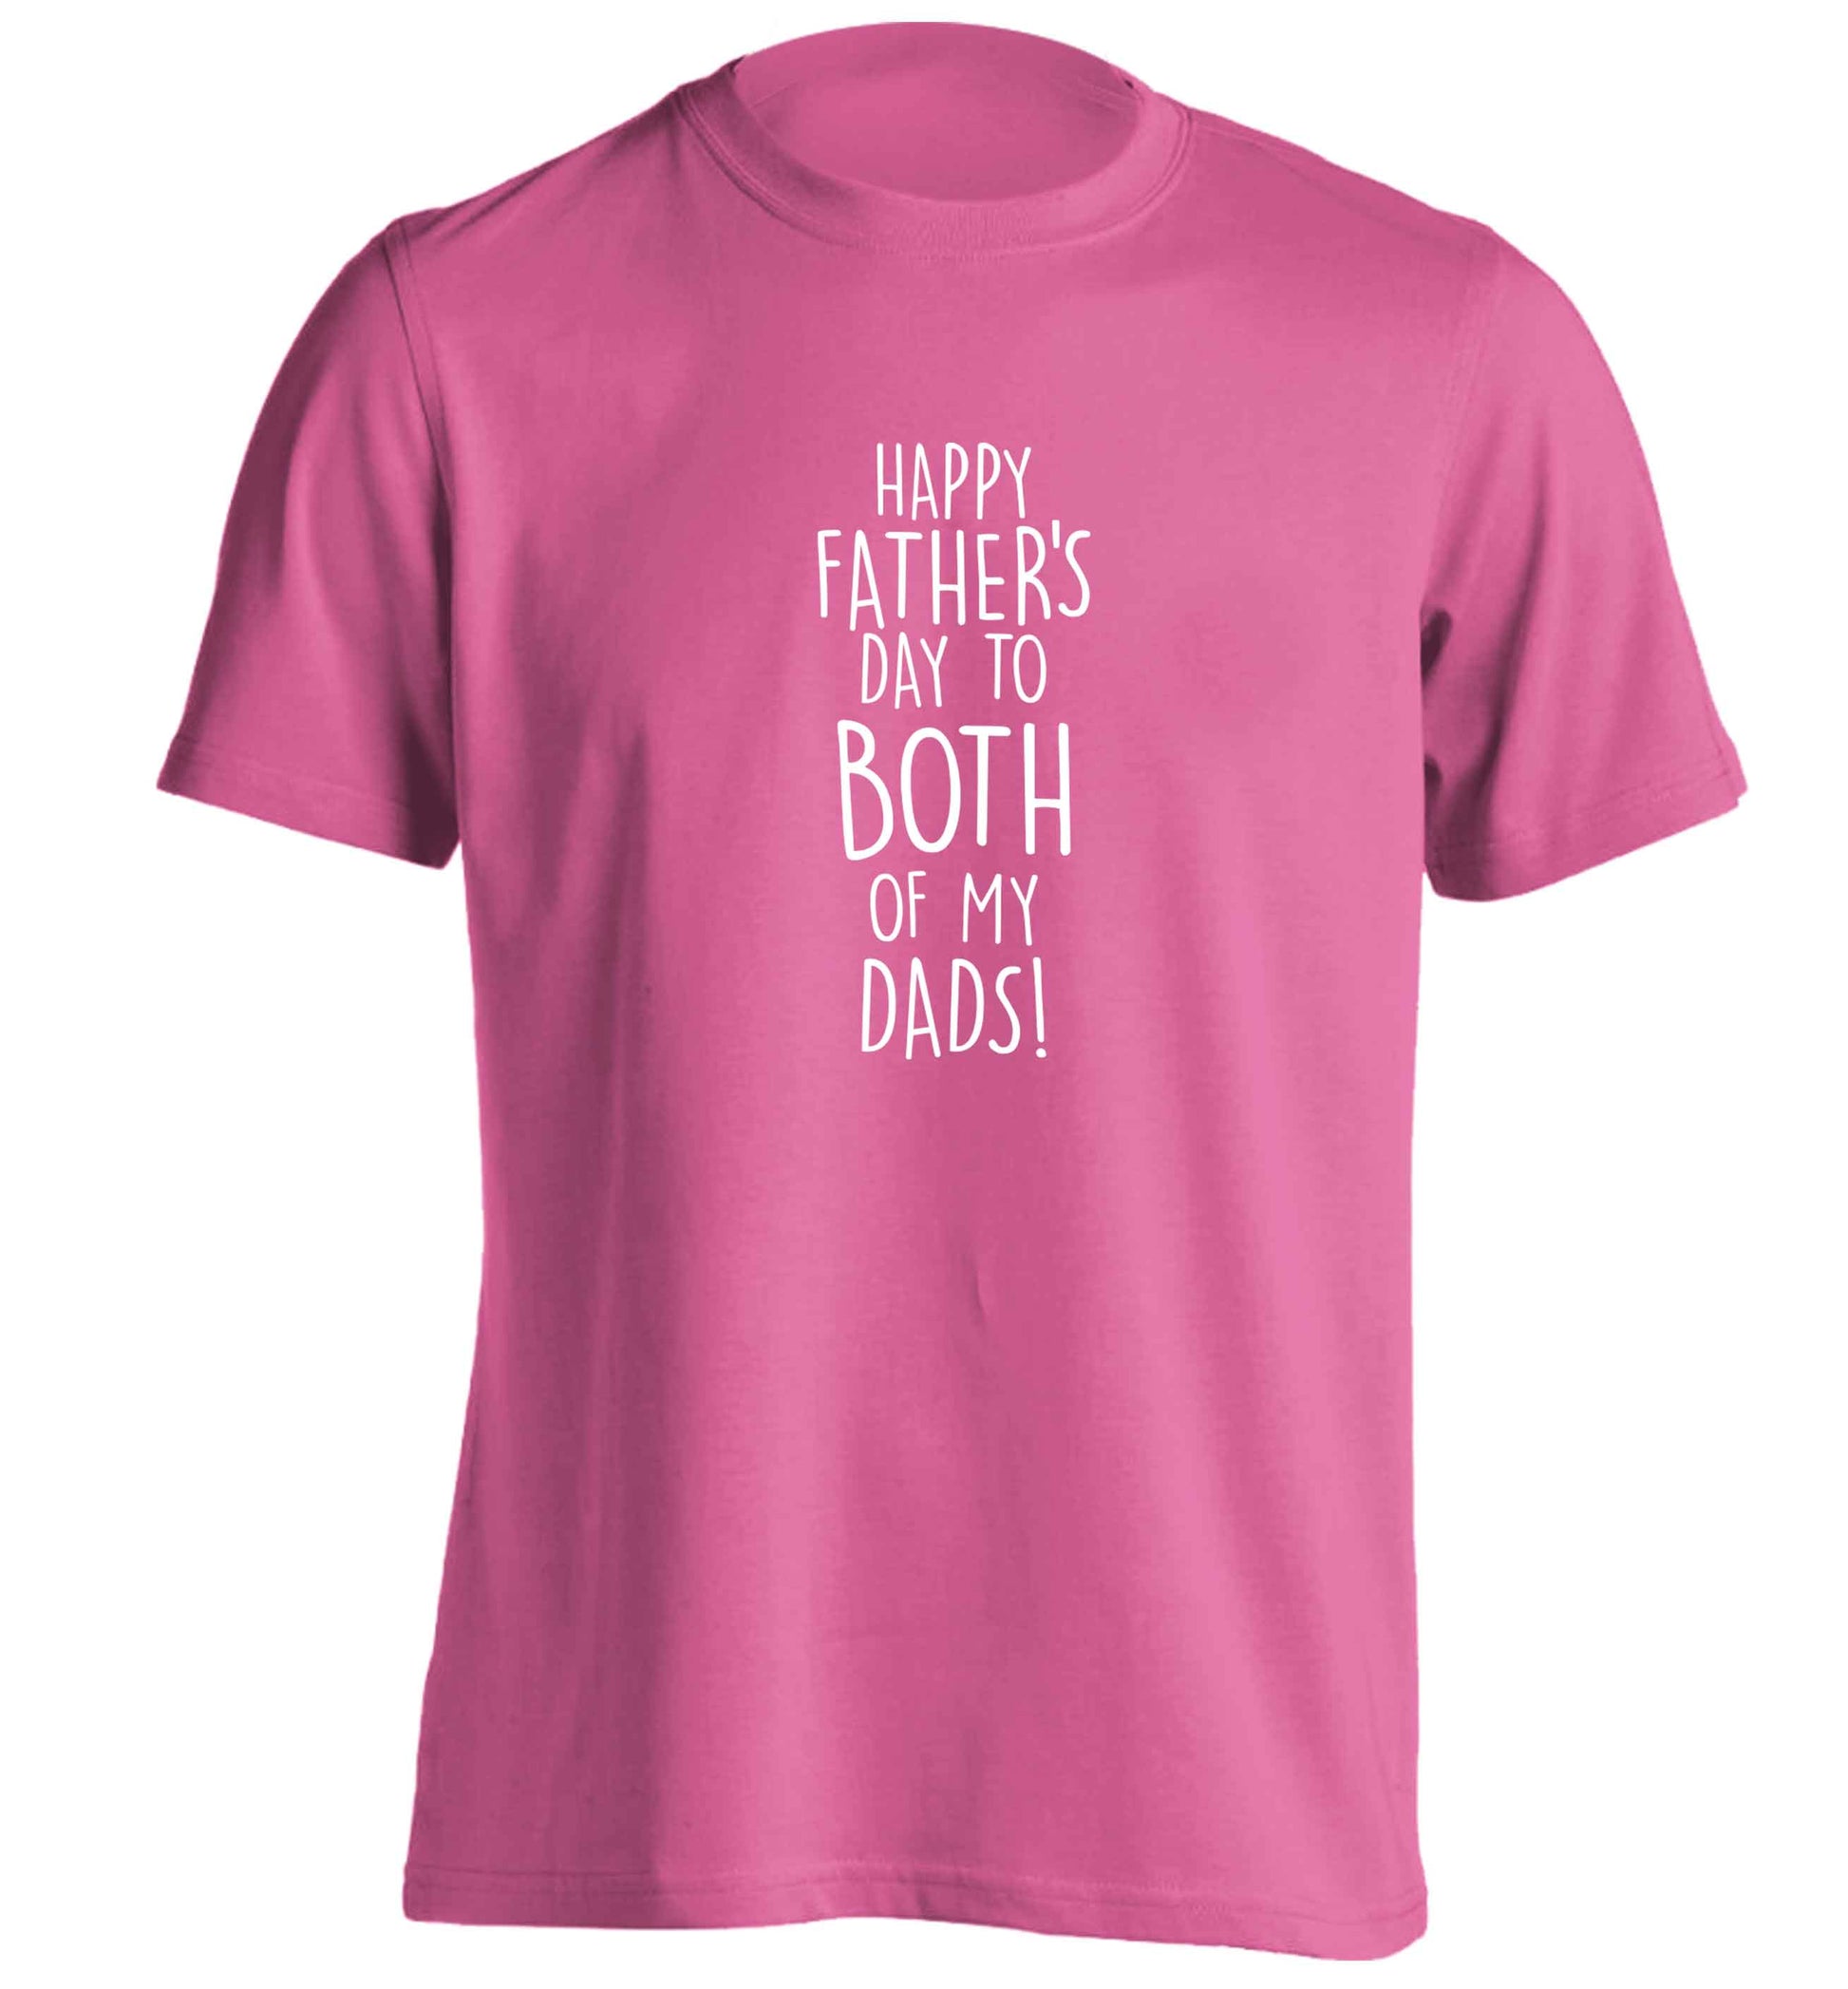 Happy Father's day to both of my dads adults unisex pink Tshirt 2XL